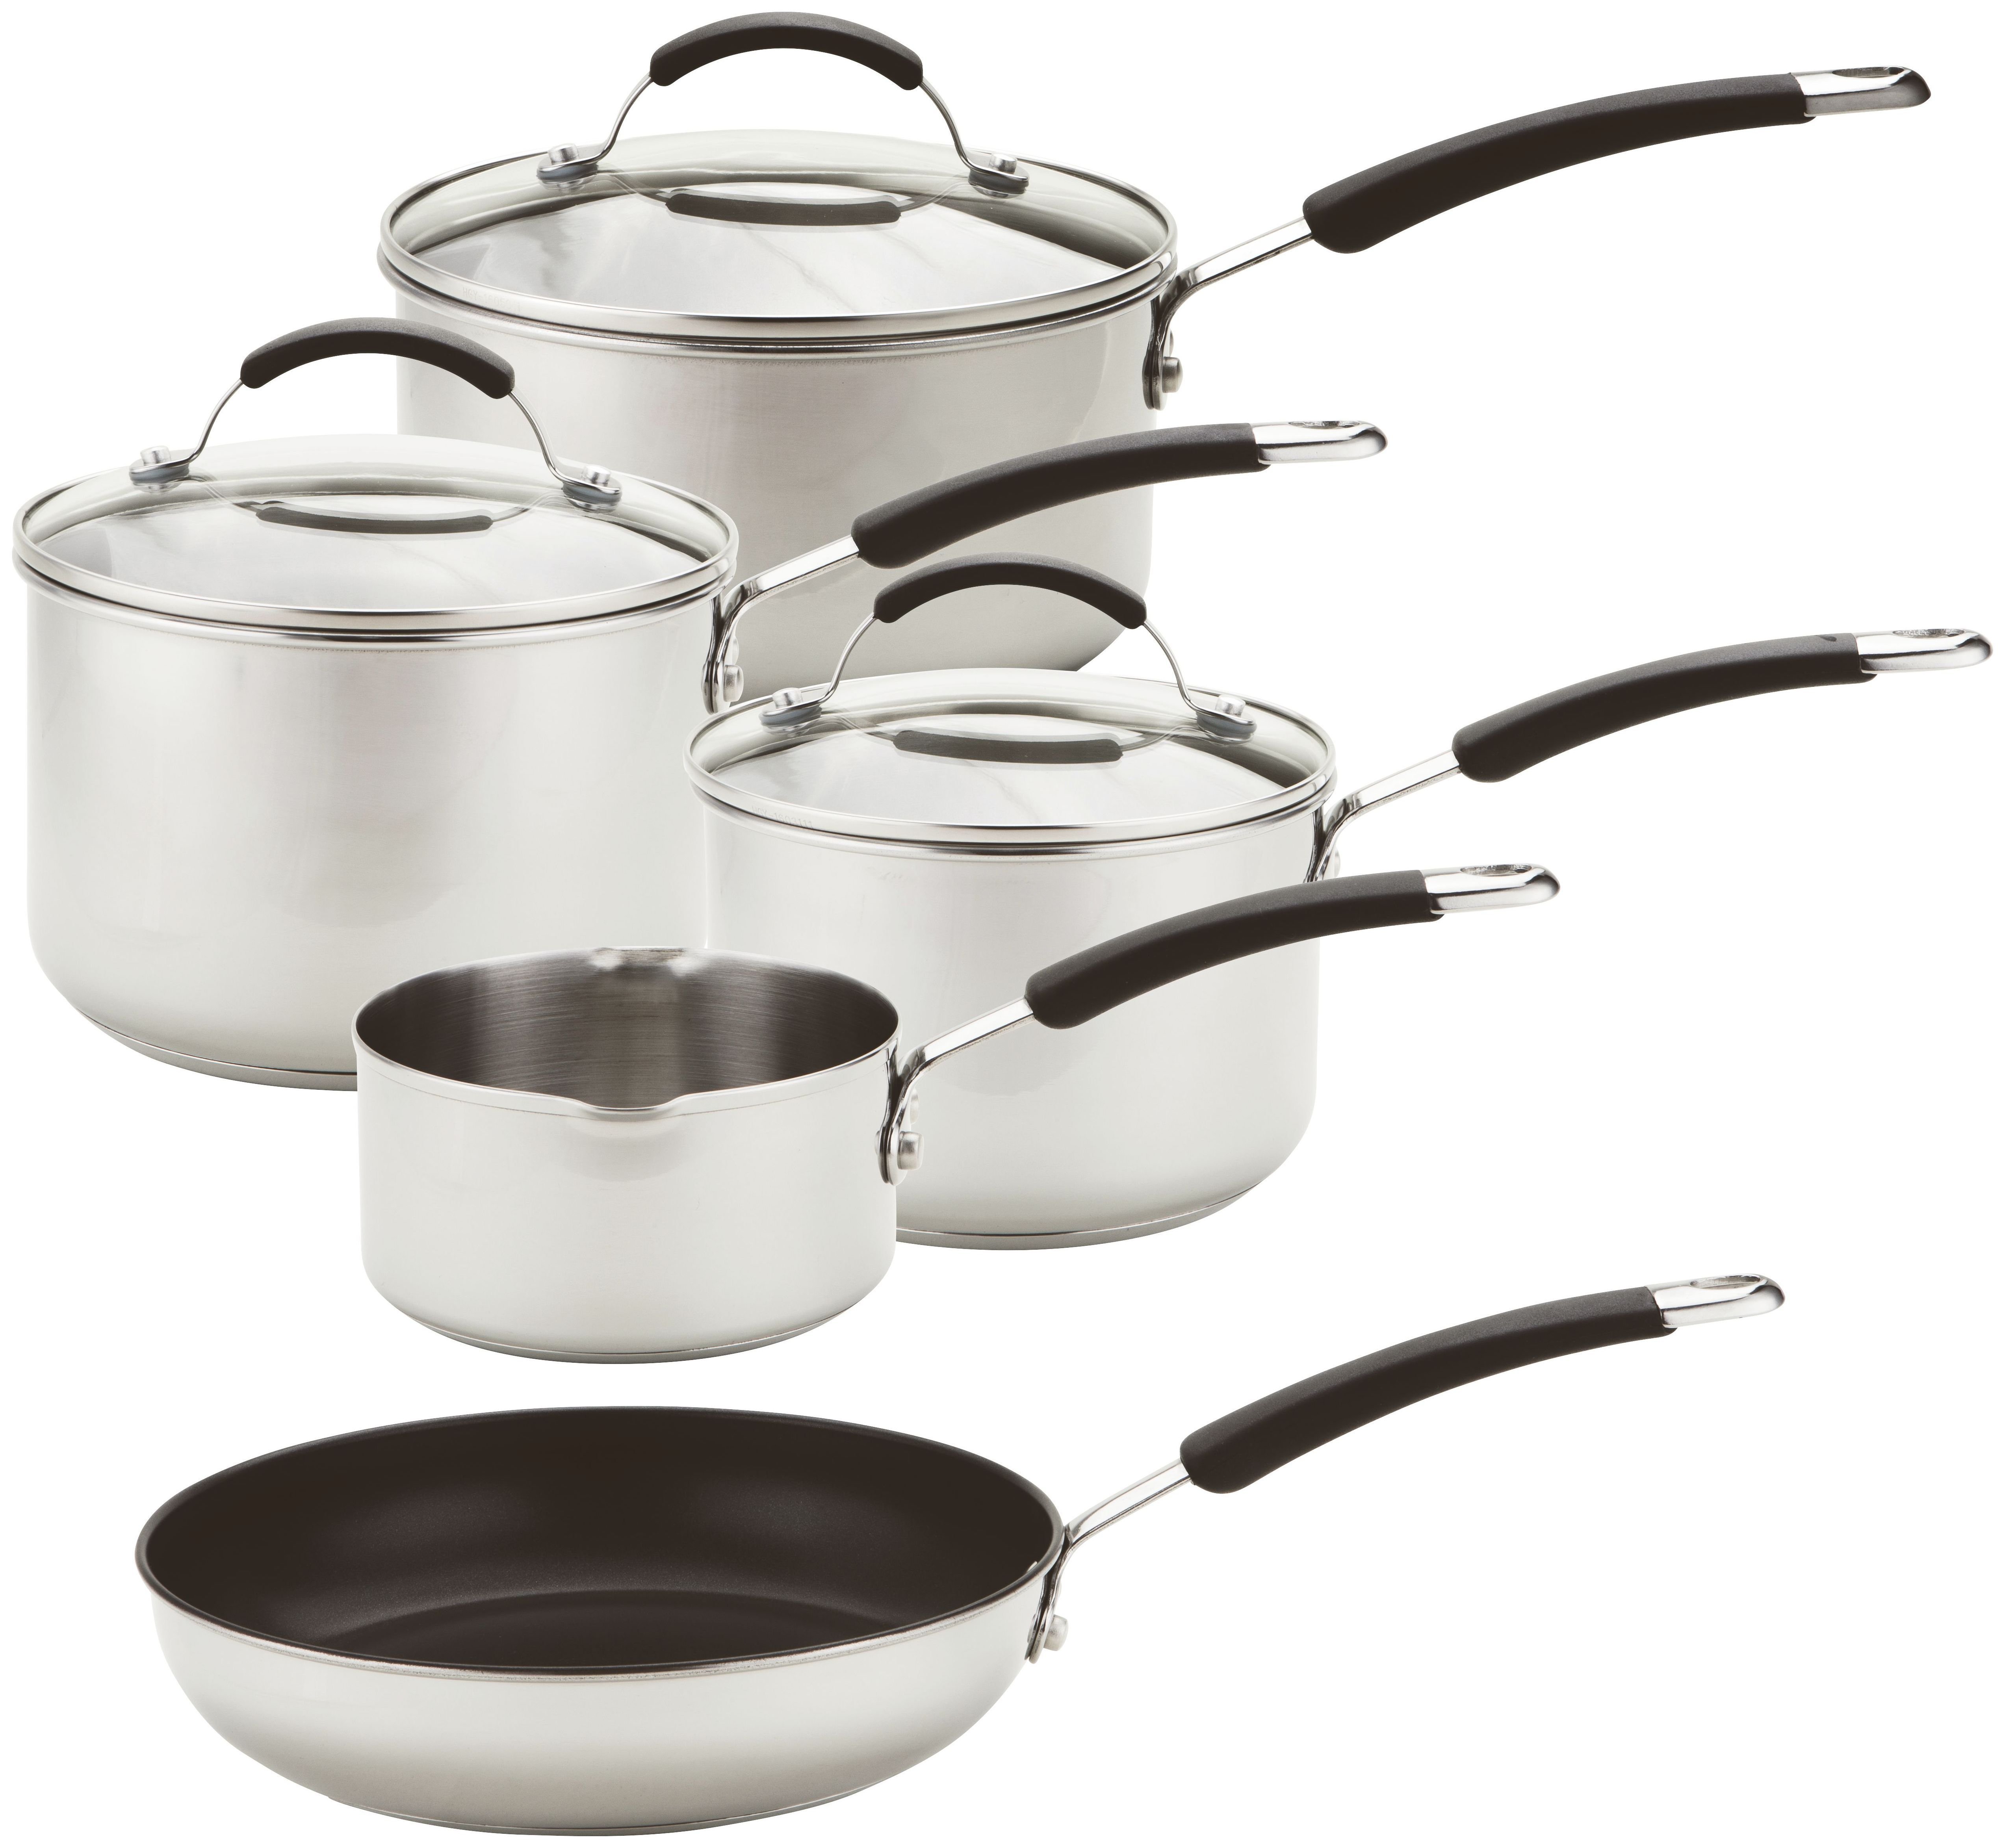 Meyer 5 Piece Stainless Steel Induction Pan Set. Review